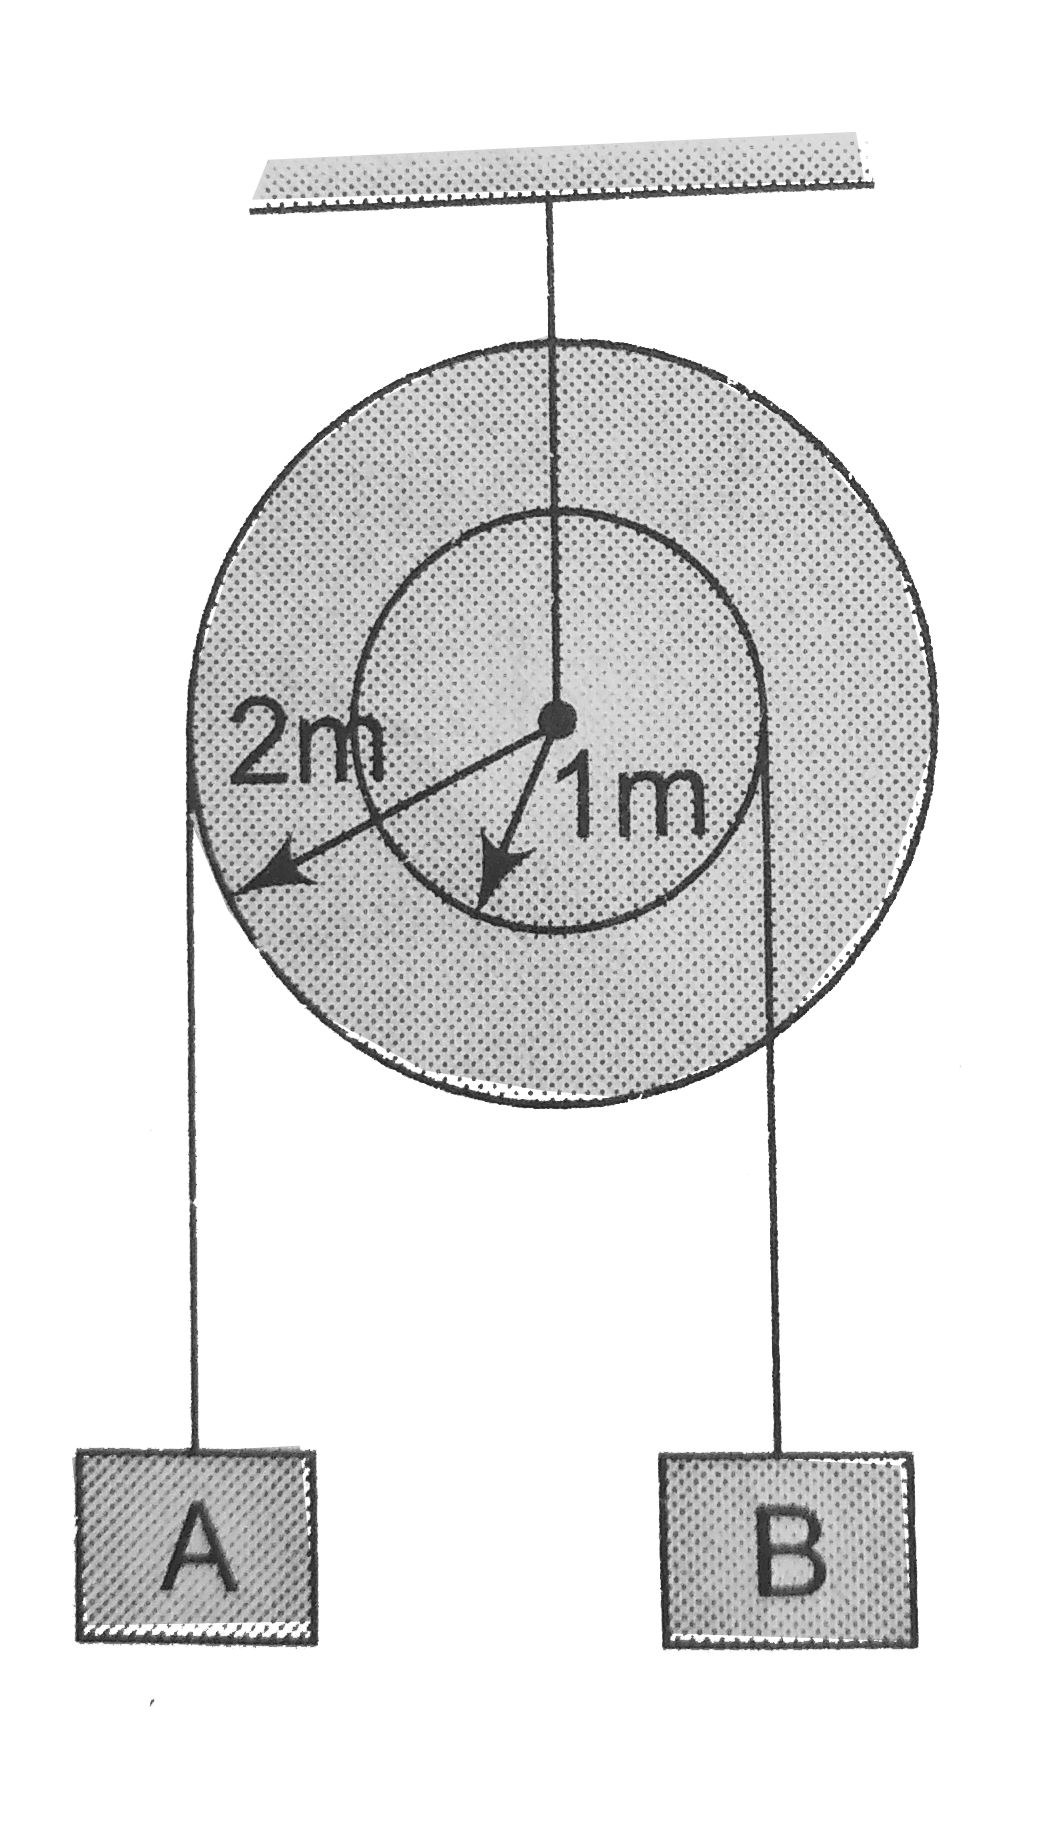 In the pulley system shown, if radii of the bigger and smaller pulley are 2 m and 1 m respectively and the acceleration of block A is5 m//s^2 in the downward direction, then the acceleration of block B will be :   .